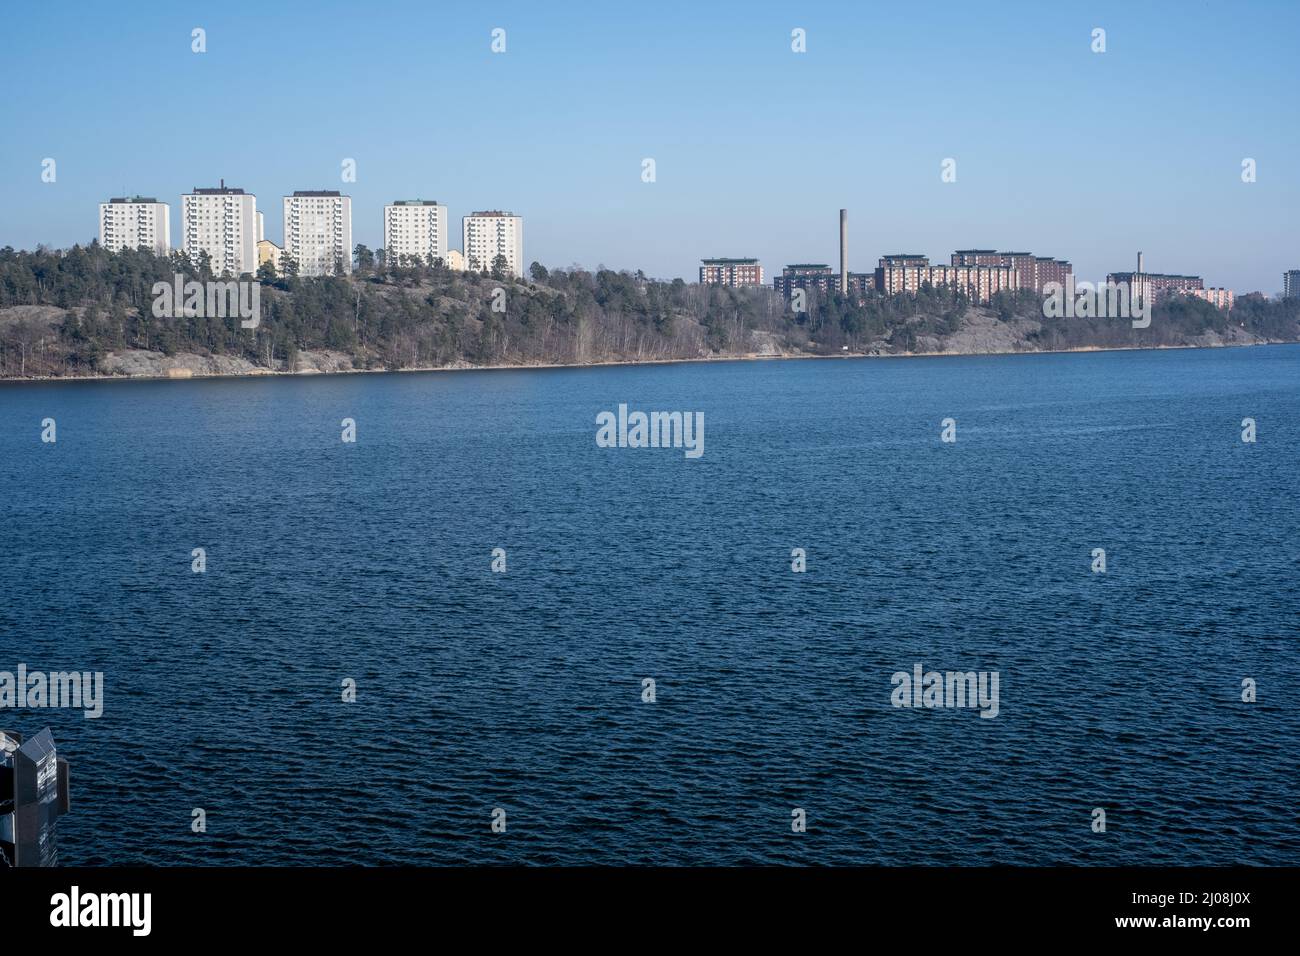 Stockholm / Sweden - MARCH 14, 2022: View of Stockholm suburban of Lidingö from across the river on a sunny day Stock Photo